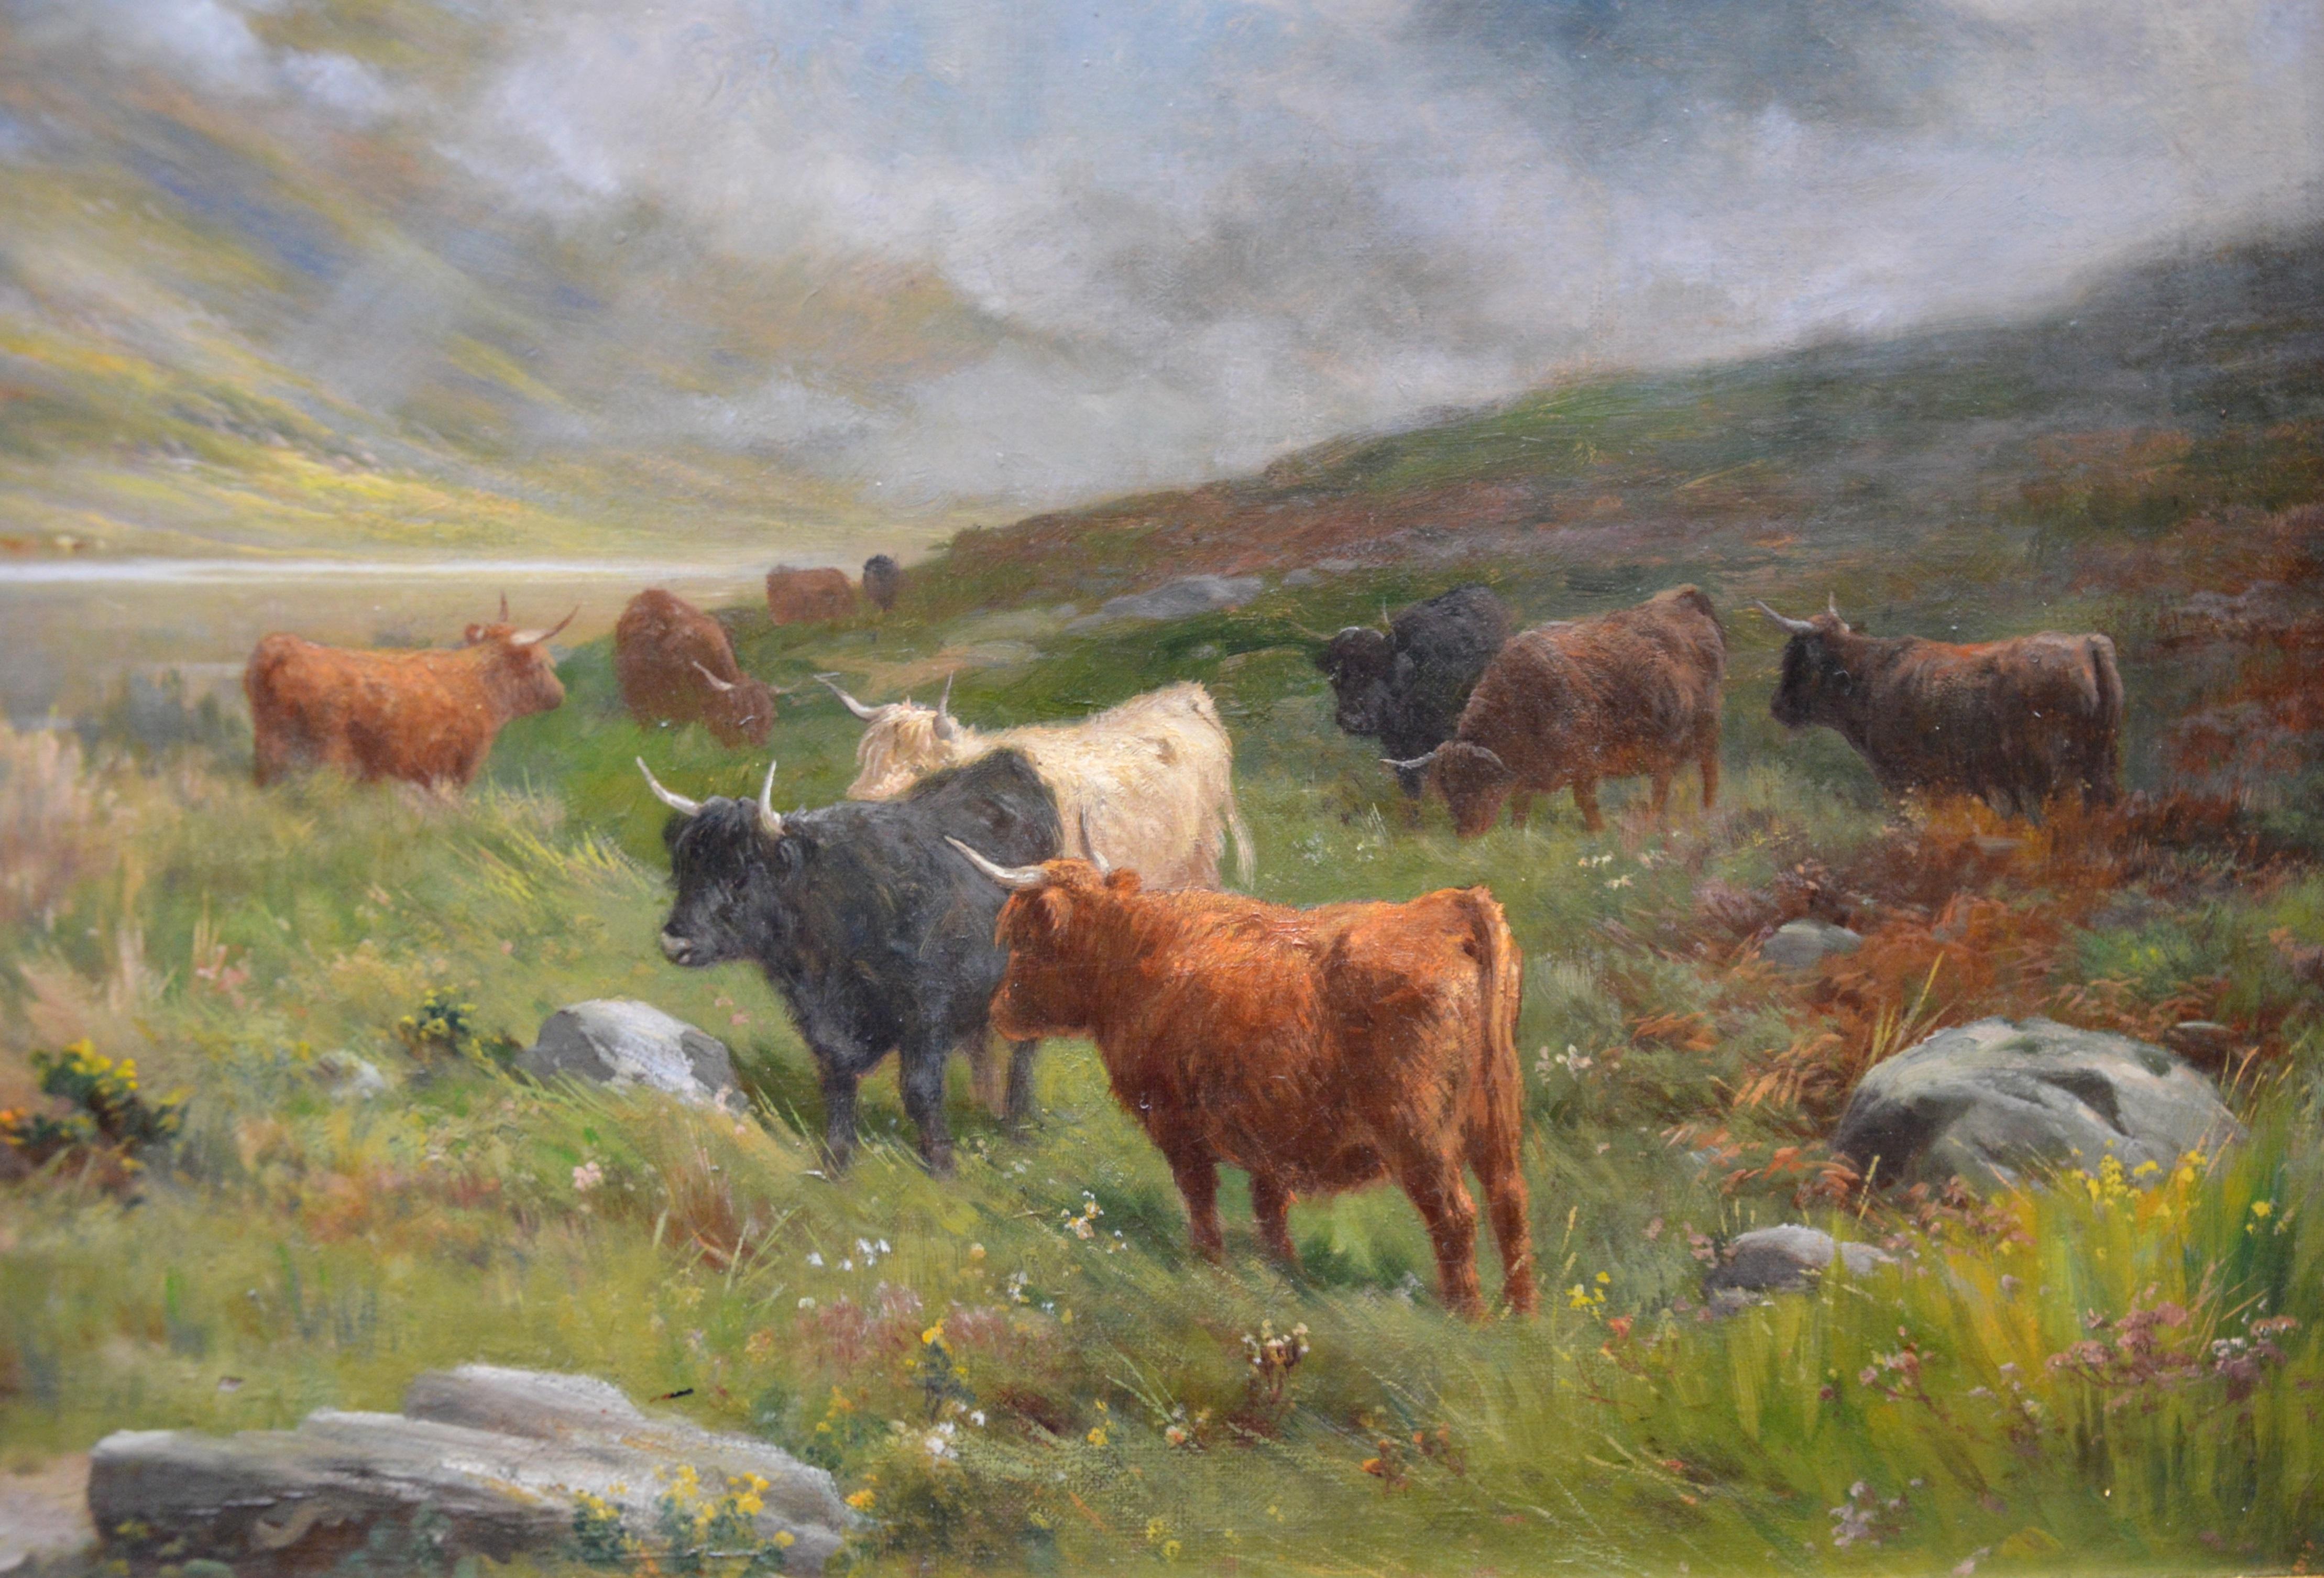 ‘Highland Cattle Watering, Loch Lomond’ by Claude Cardon (1864-1937). 

The painting – which depicts longhorn cattle watering before Ben Lomond in the Scottish Highlands – is signed by the artist and presented in a fine quality, newly commissioned